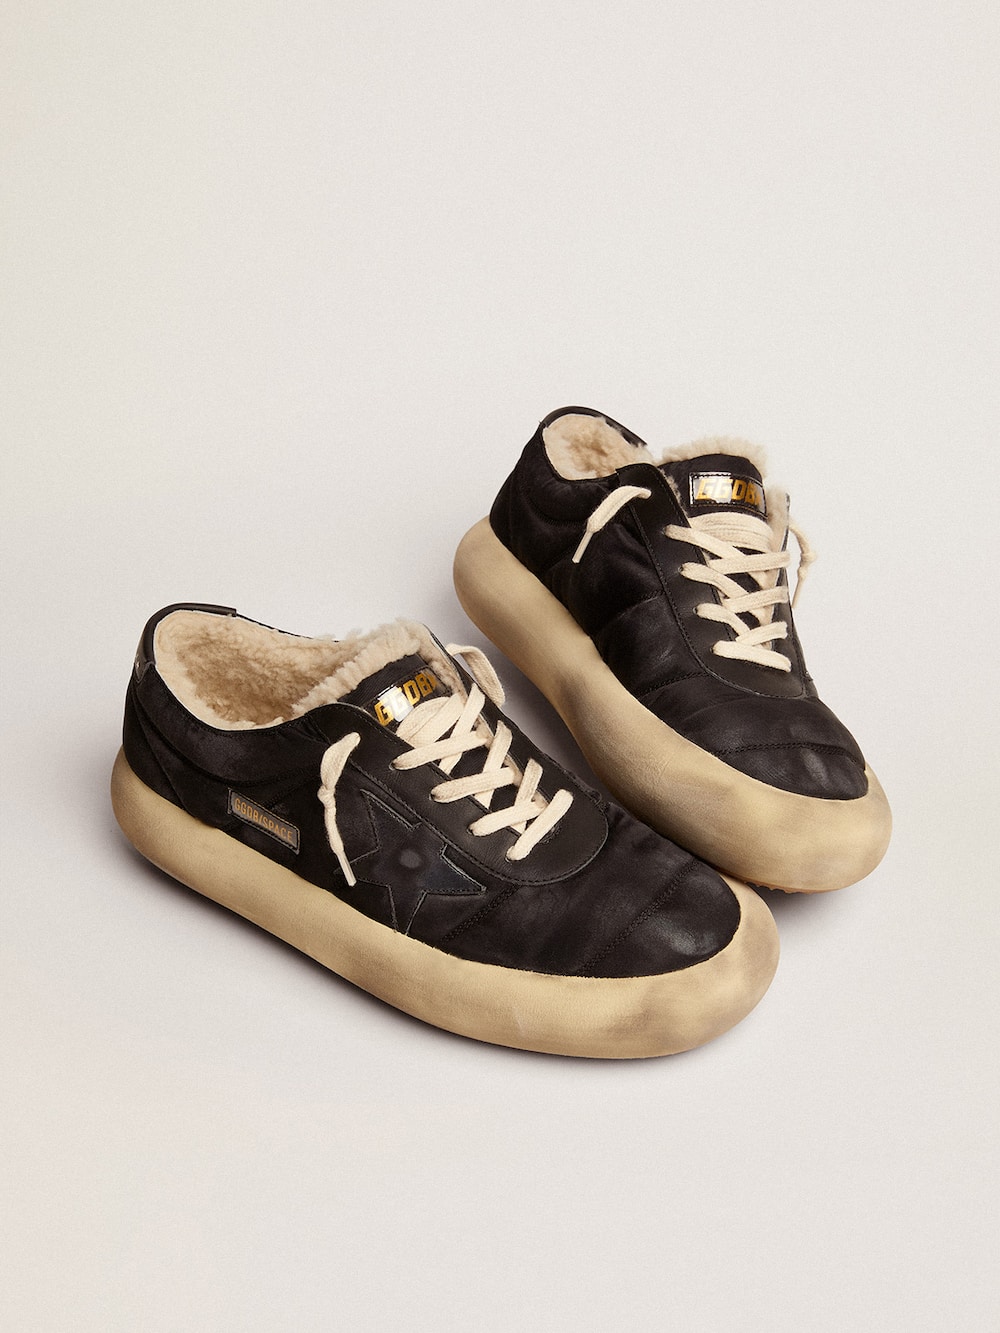 Golden Goose - Men's Space-Star shoes in quilted black nylon with shearling lining in 